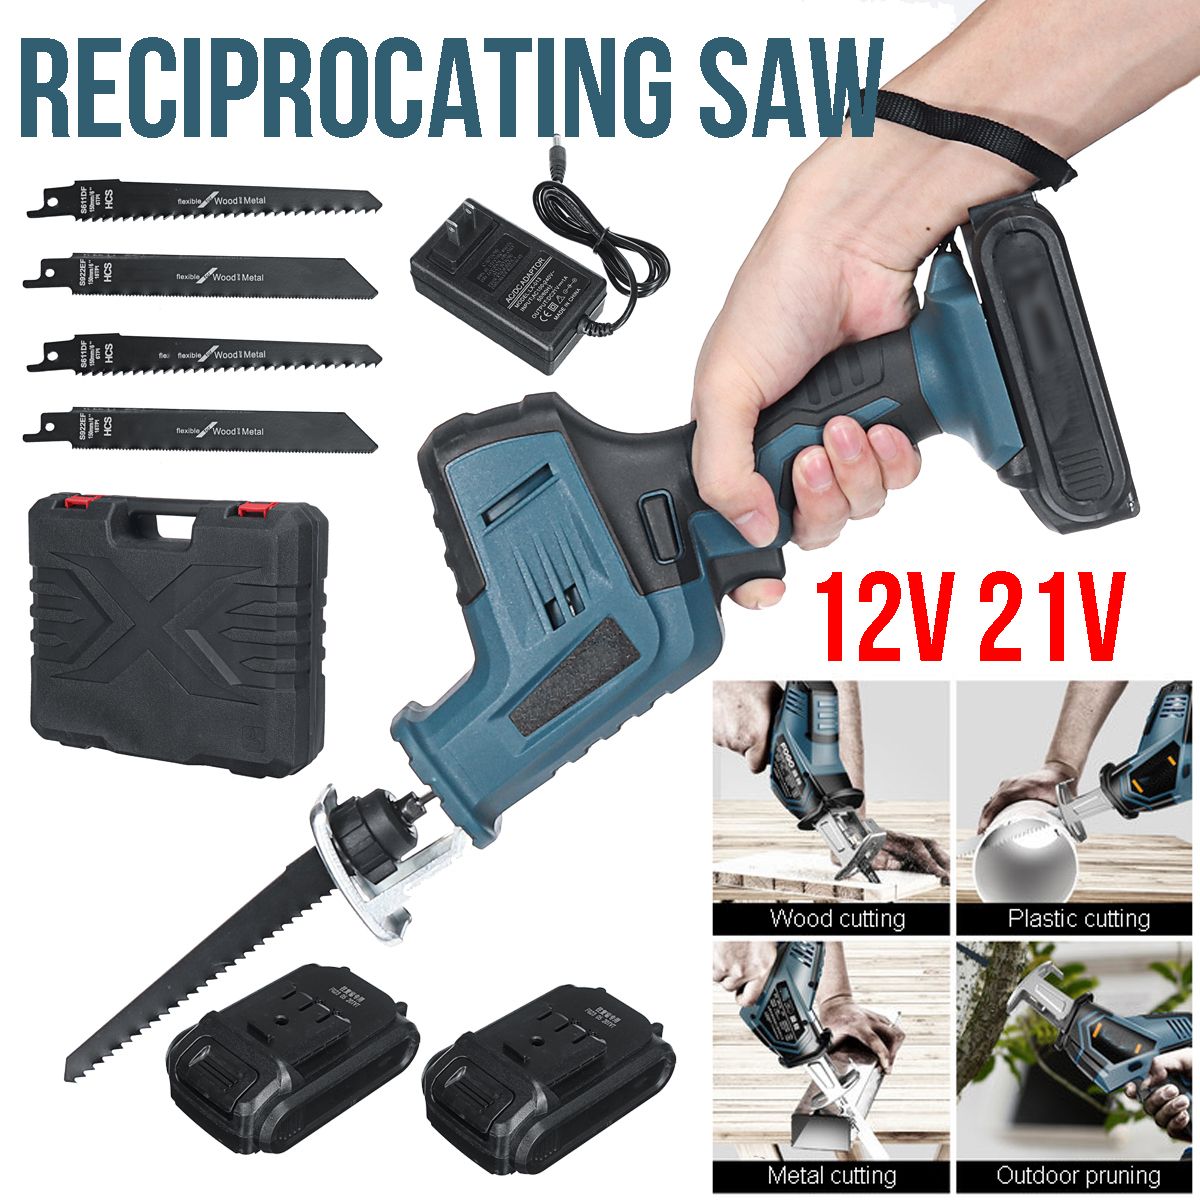 Cordless-Portable-Electric-Reciprocating-Saw-Cutter-Metal-Cutting-Saw-W-1-or-2-Battery-1721112